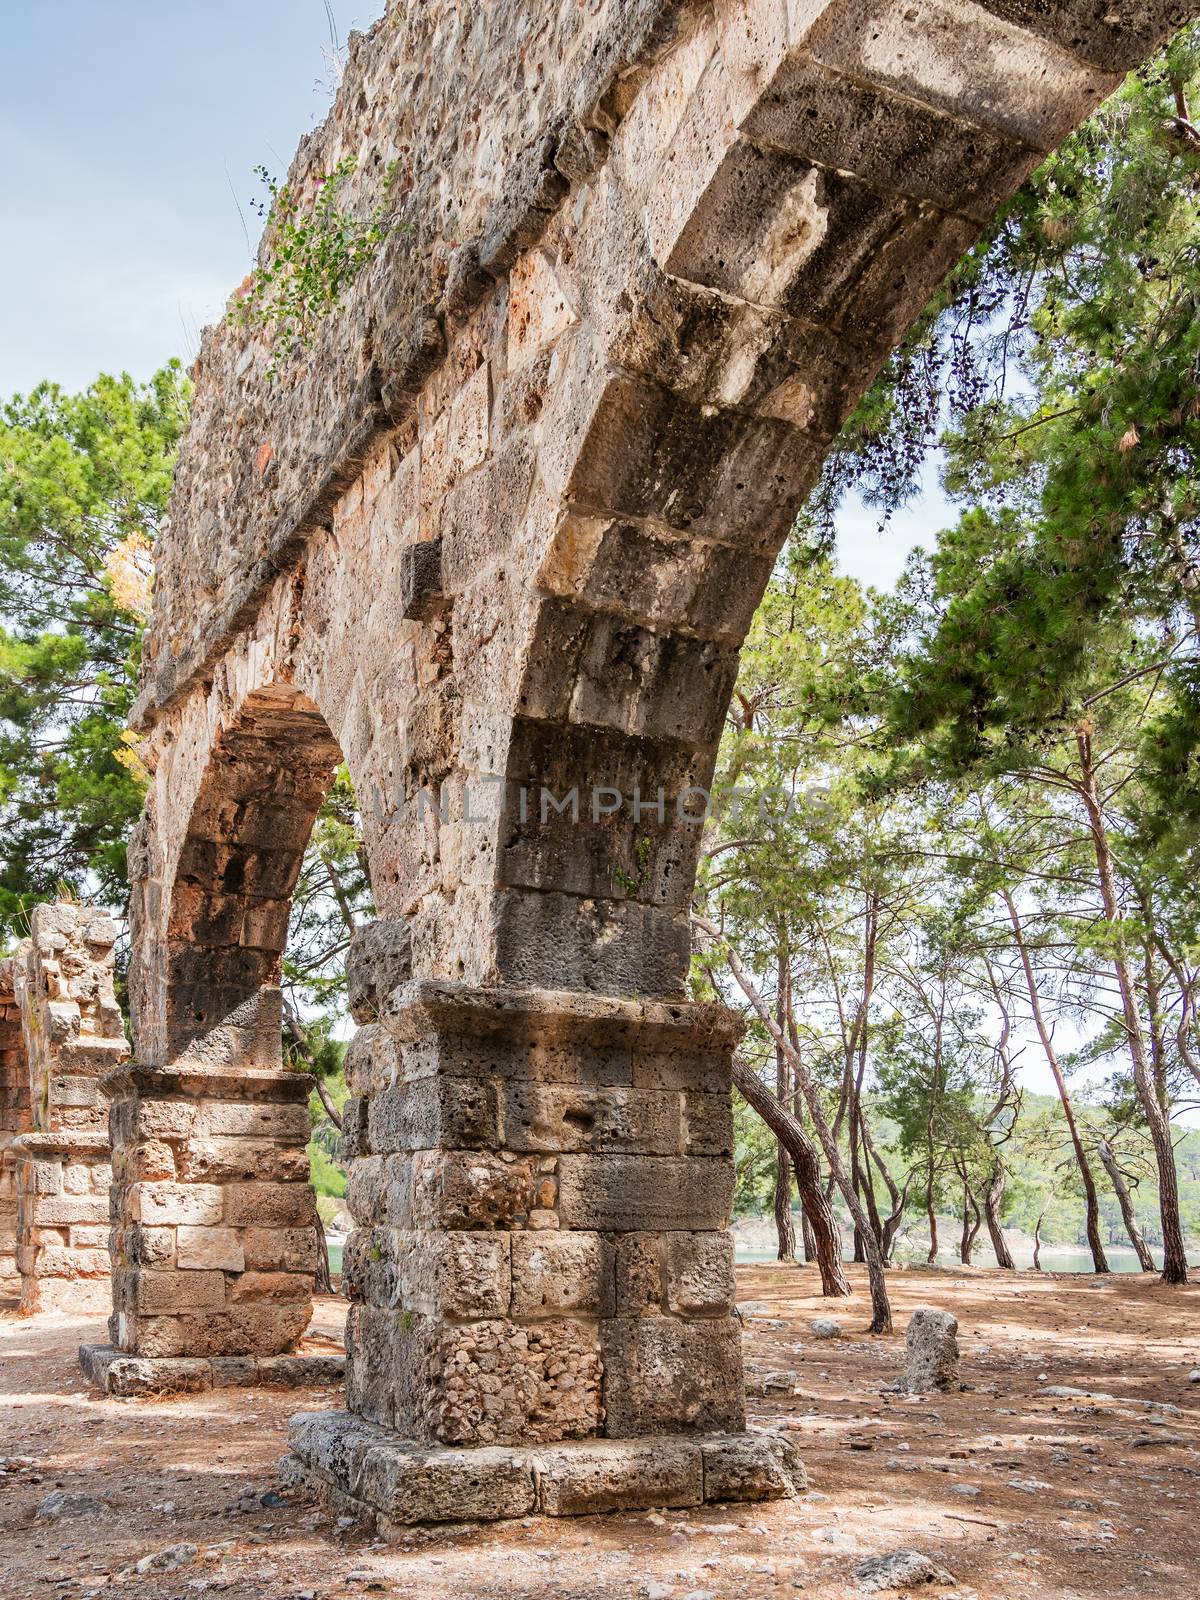 Ruins of large bath in ancient Phaselis city. Famous architectural landmark, Kemer district, Antalya province. Turkey.